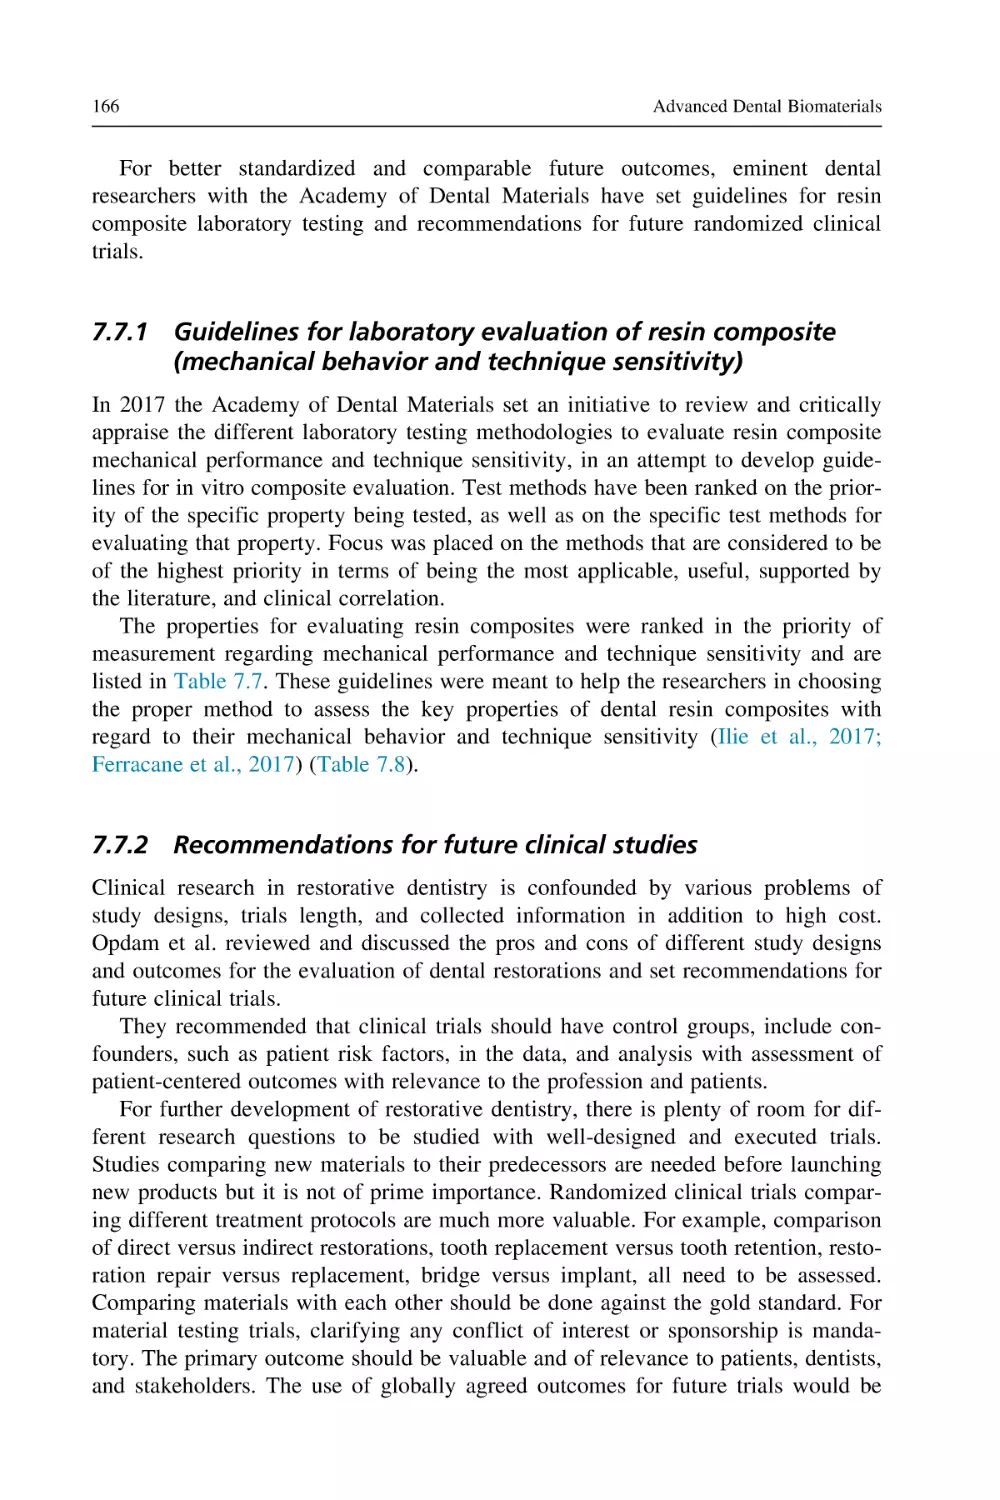 7.7.1 Guidelines for laboratory evaluation of resin composite (mechanical behavior and technique sensitivity)
7.7.2 Recommendations for future clinical studies